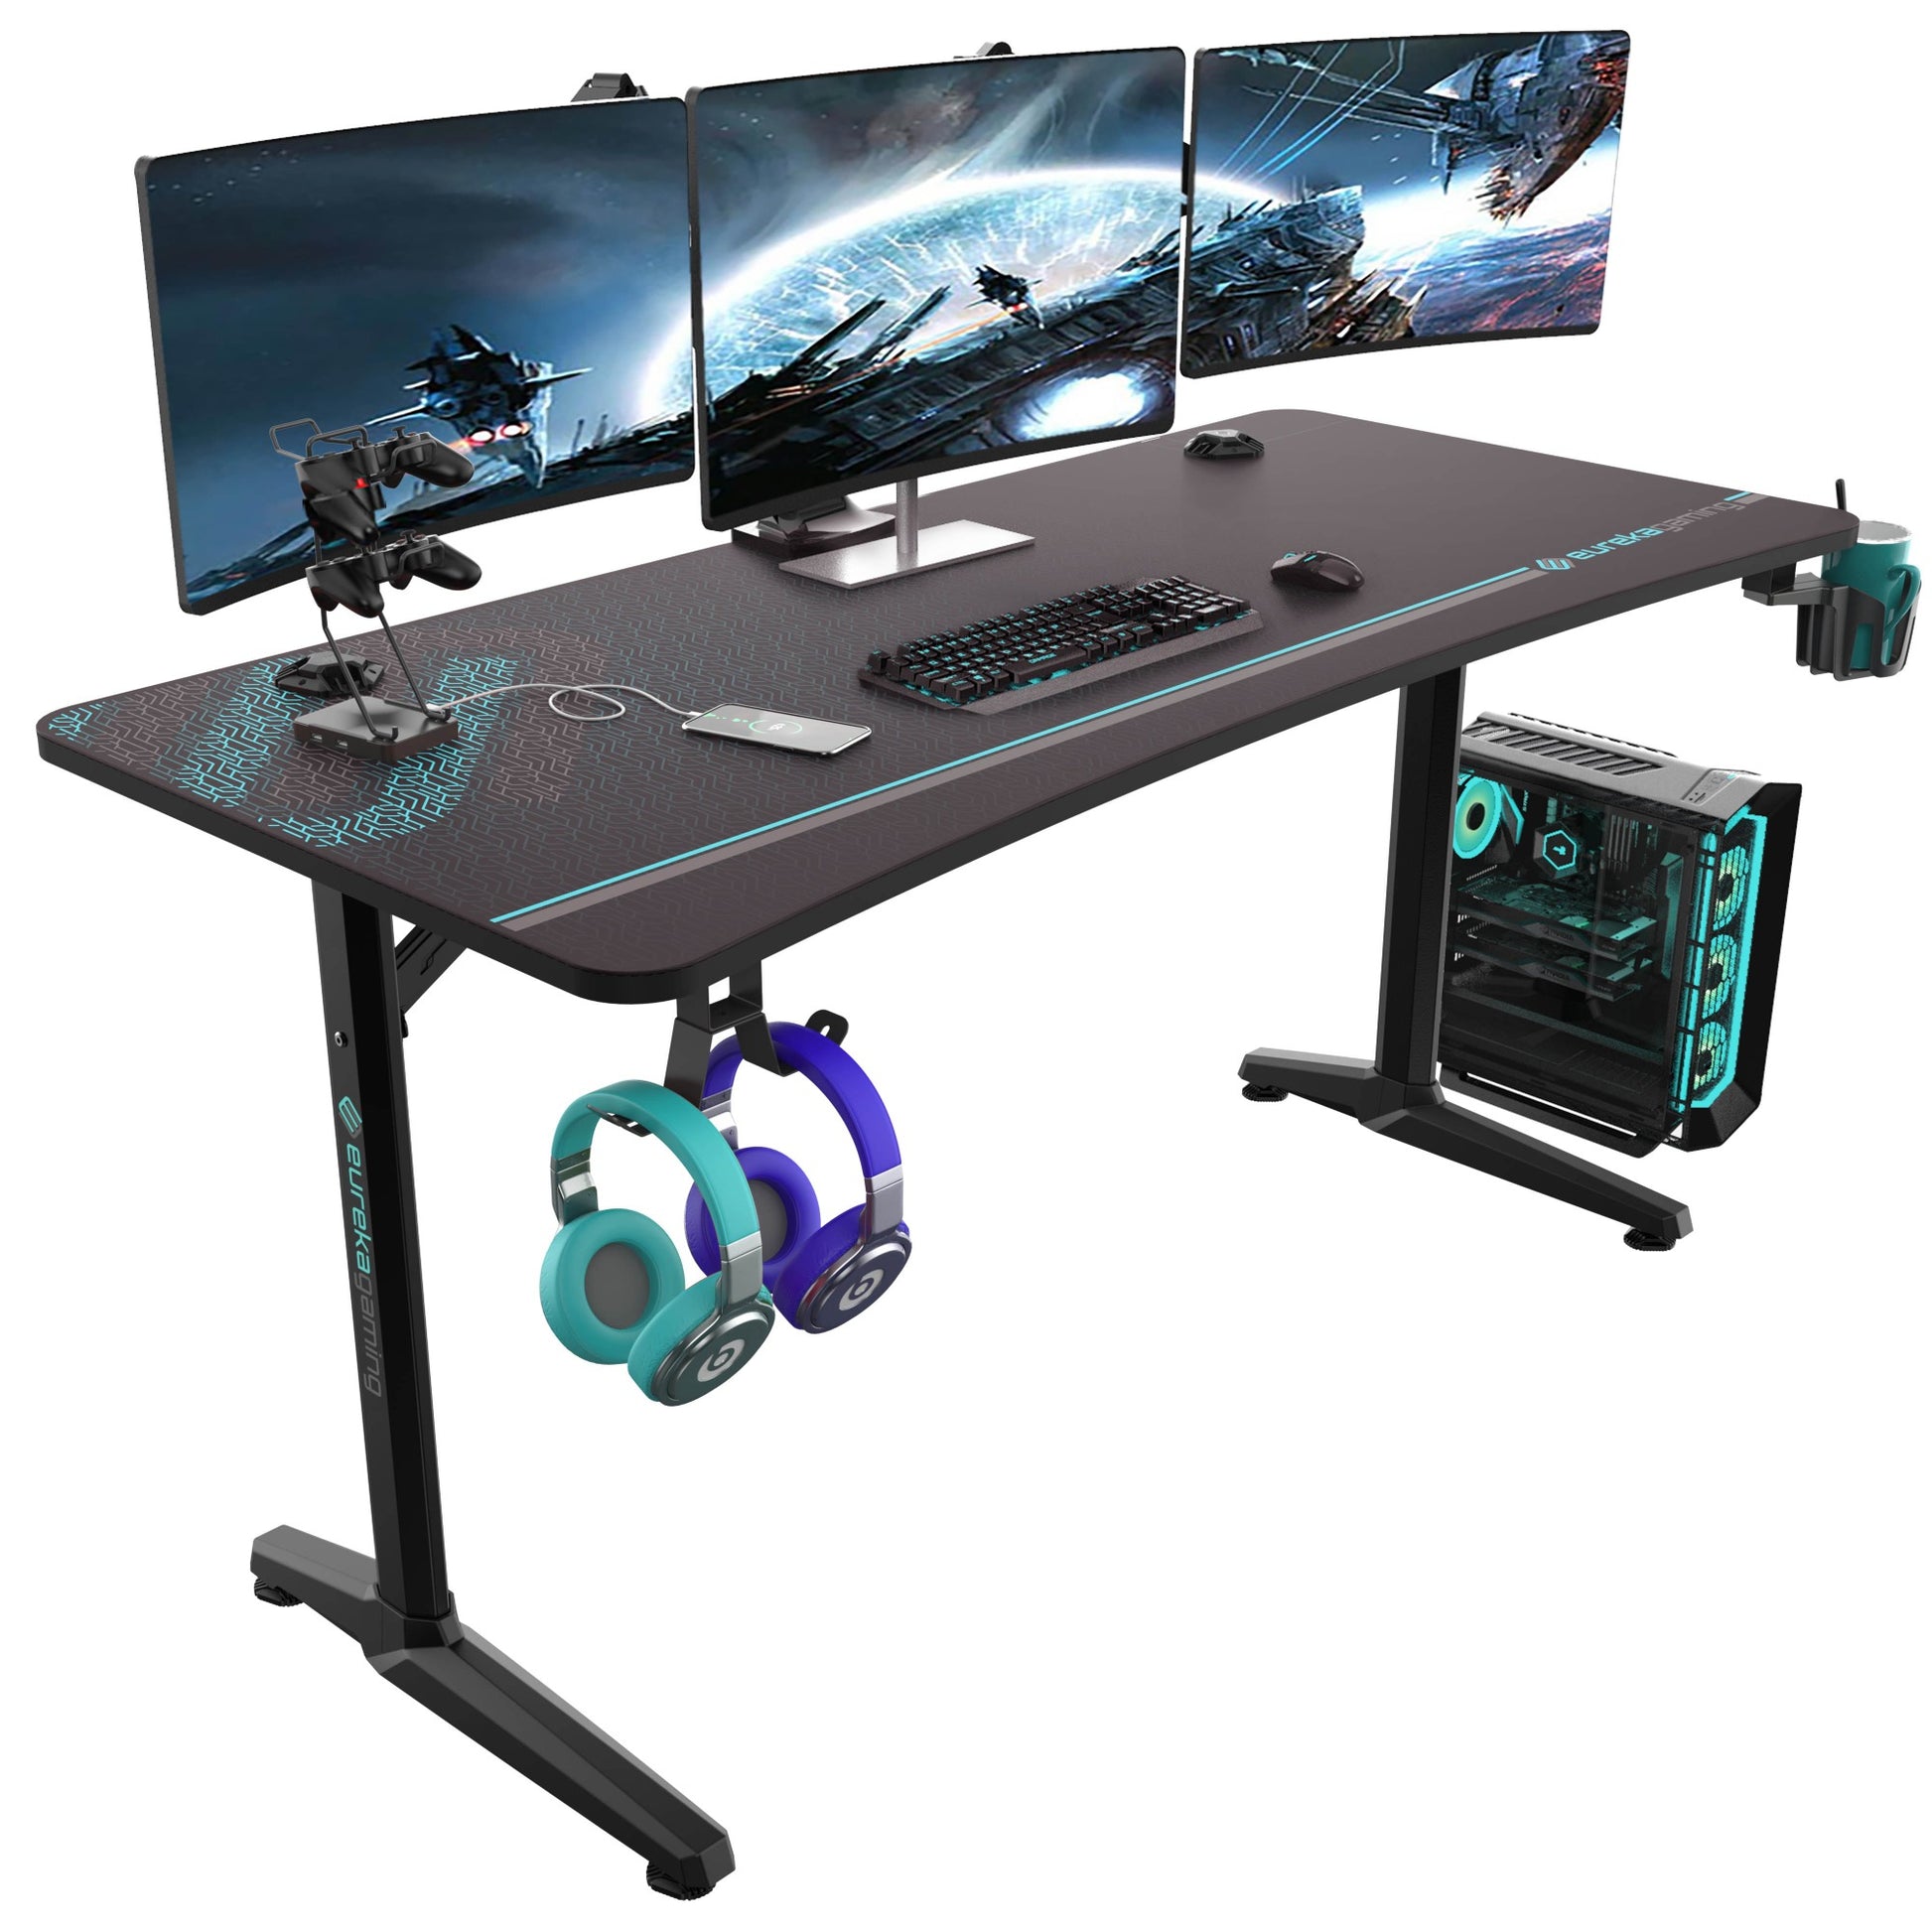 Eureka 60" Black Curved Gaming Desk with Full-surface Mouse pad